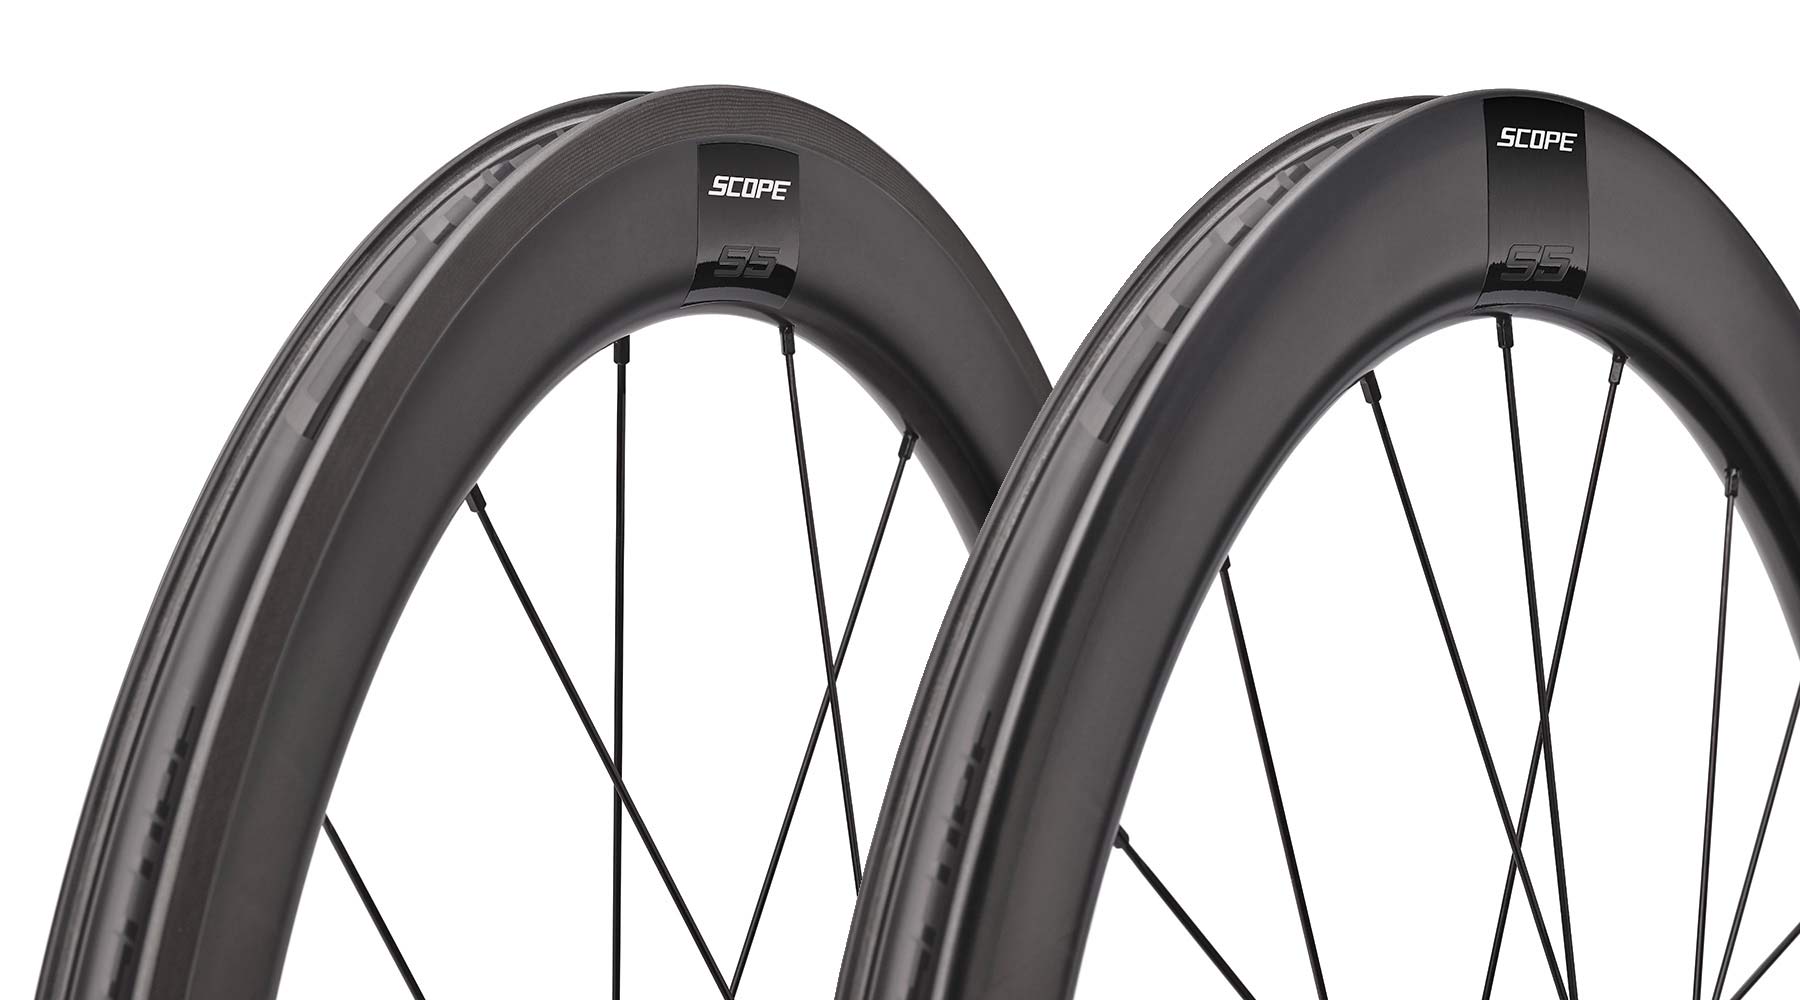 Scope Sport affordable carbon tubeless road wheels, 998€ for rim or disc brakes